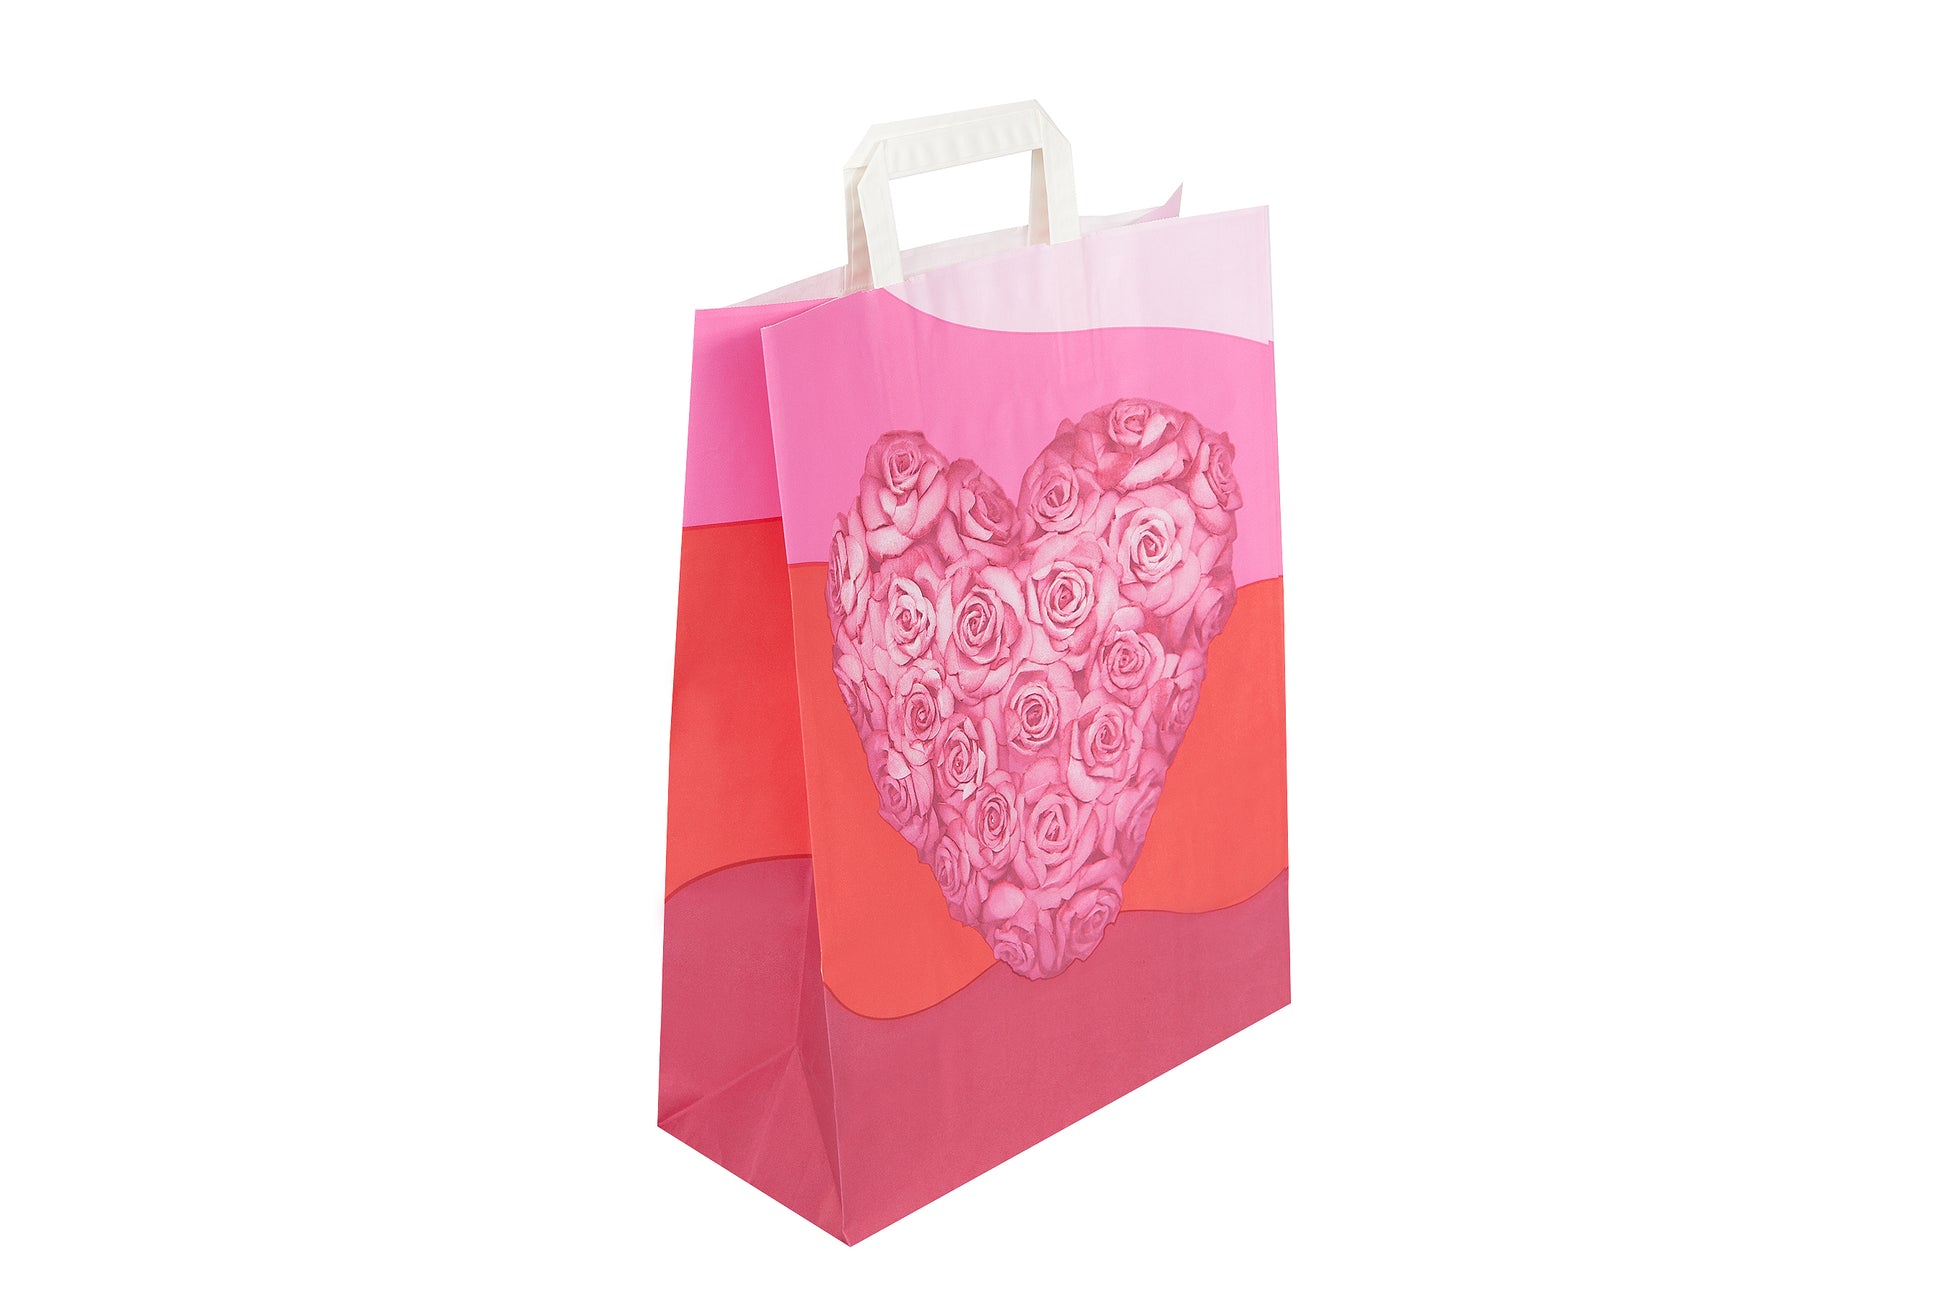 Large Heart & Roses Carrier Bags (32x14x42cm) – Big Brown Carrier Bag